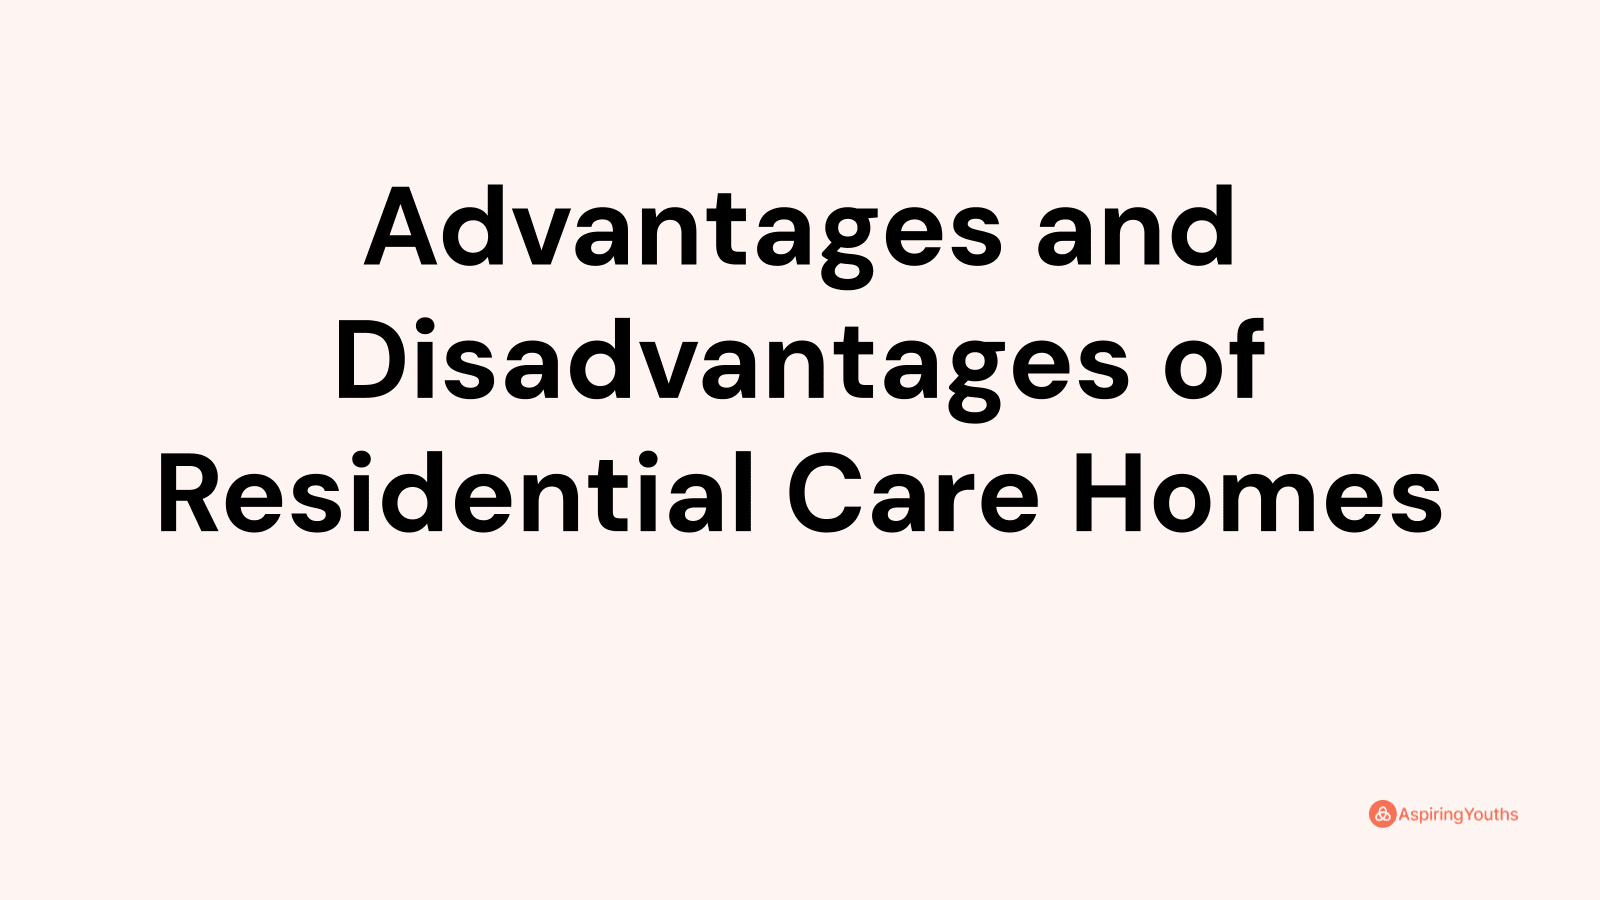 Advantages and disadvantages of Residential Care Homes